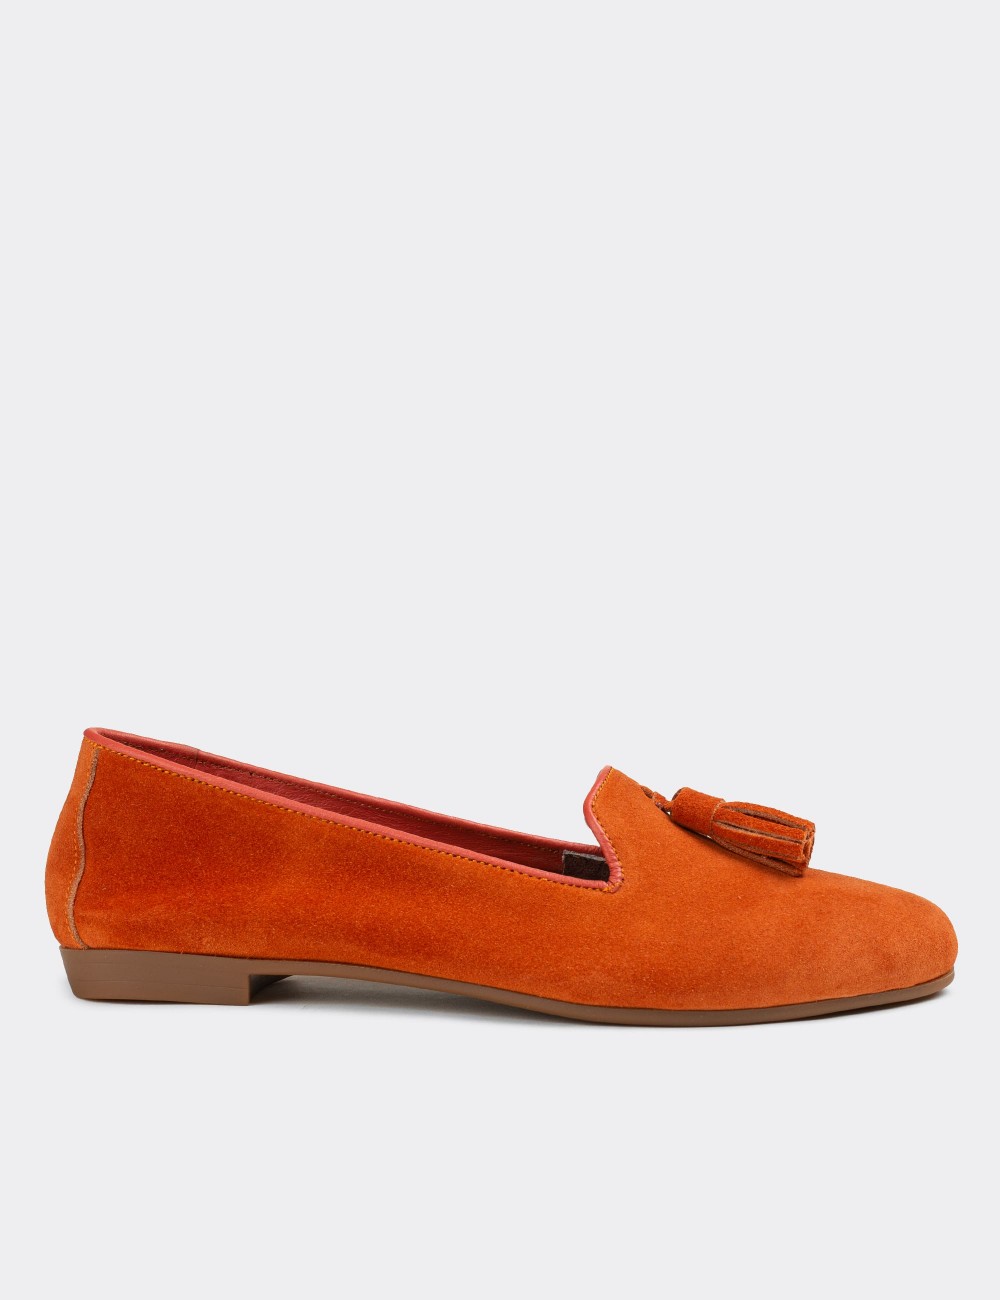 Orange Suede Leather Loafers - E3204ZTRCC01